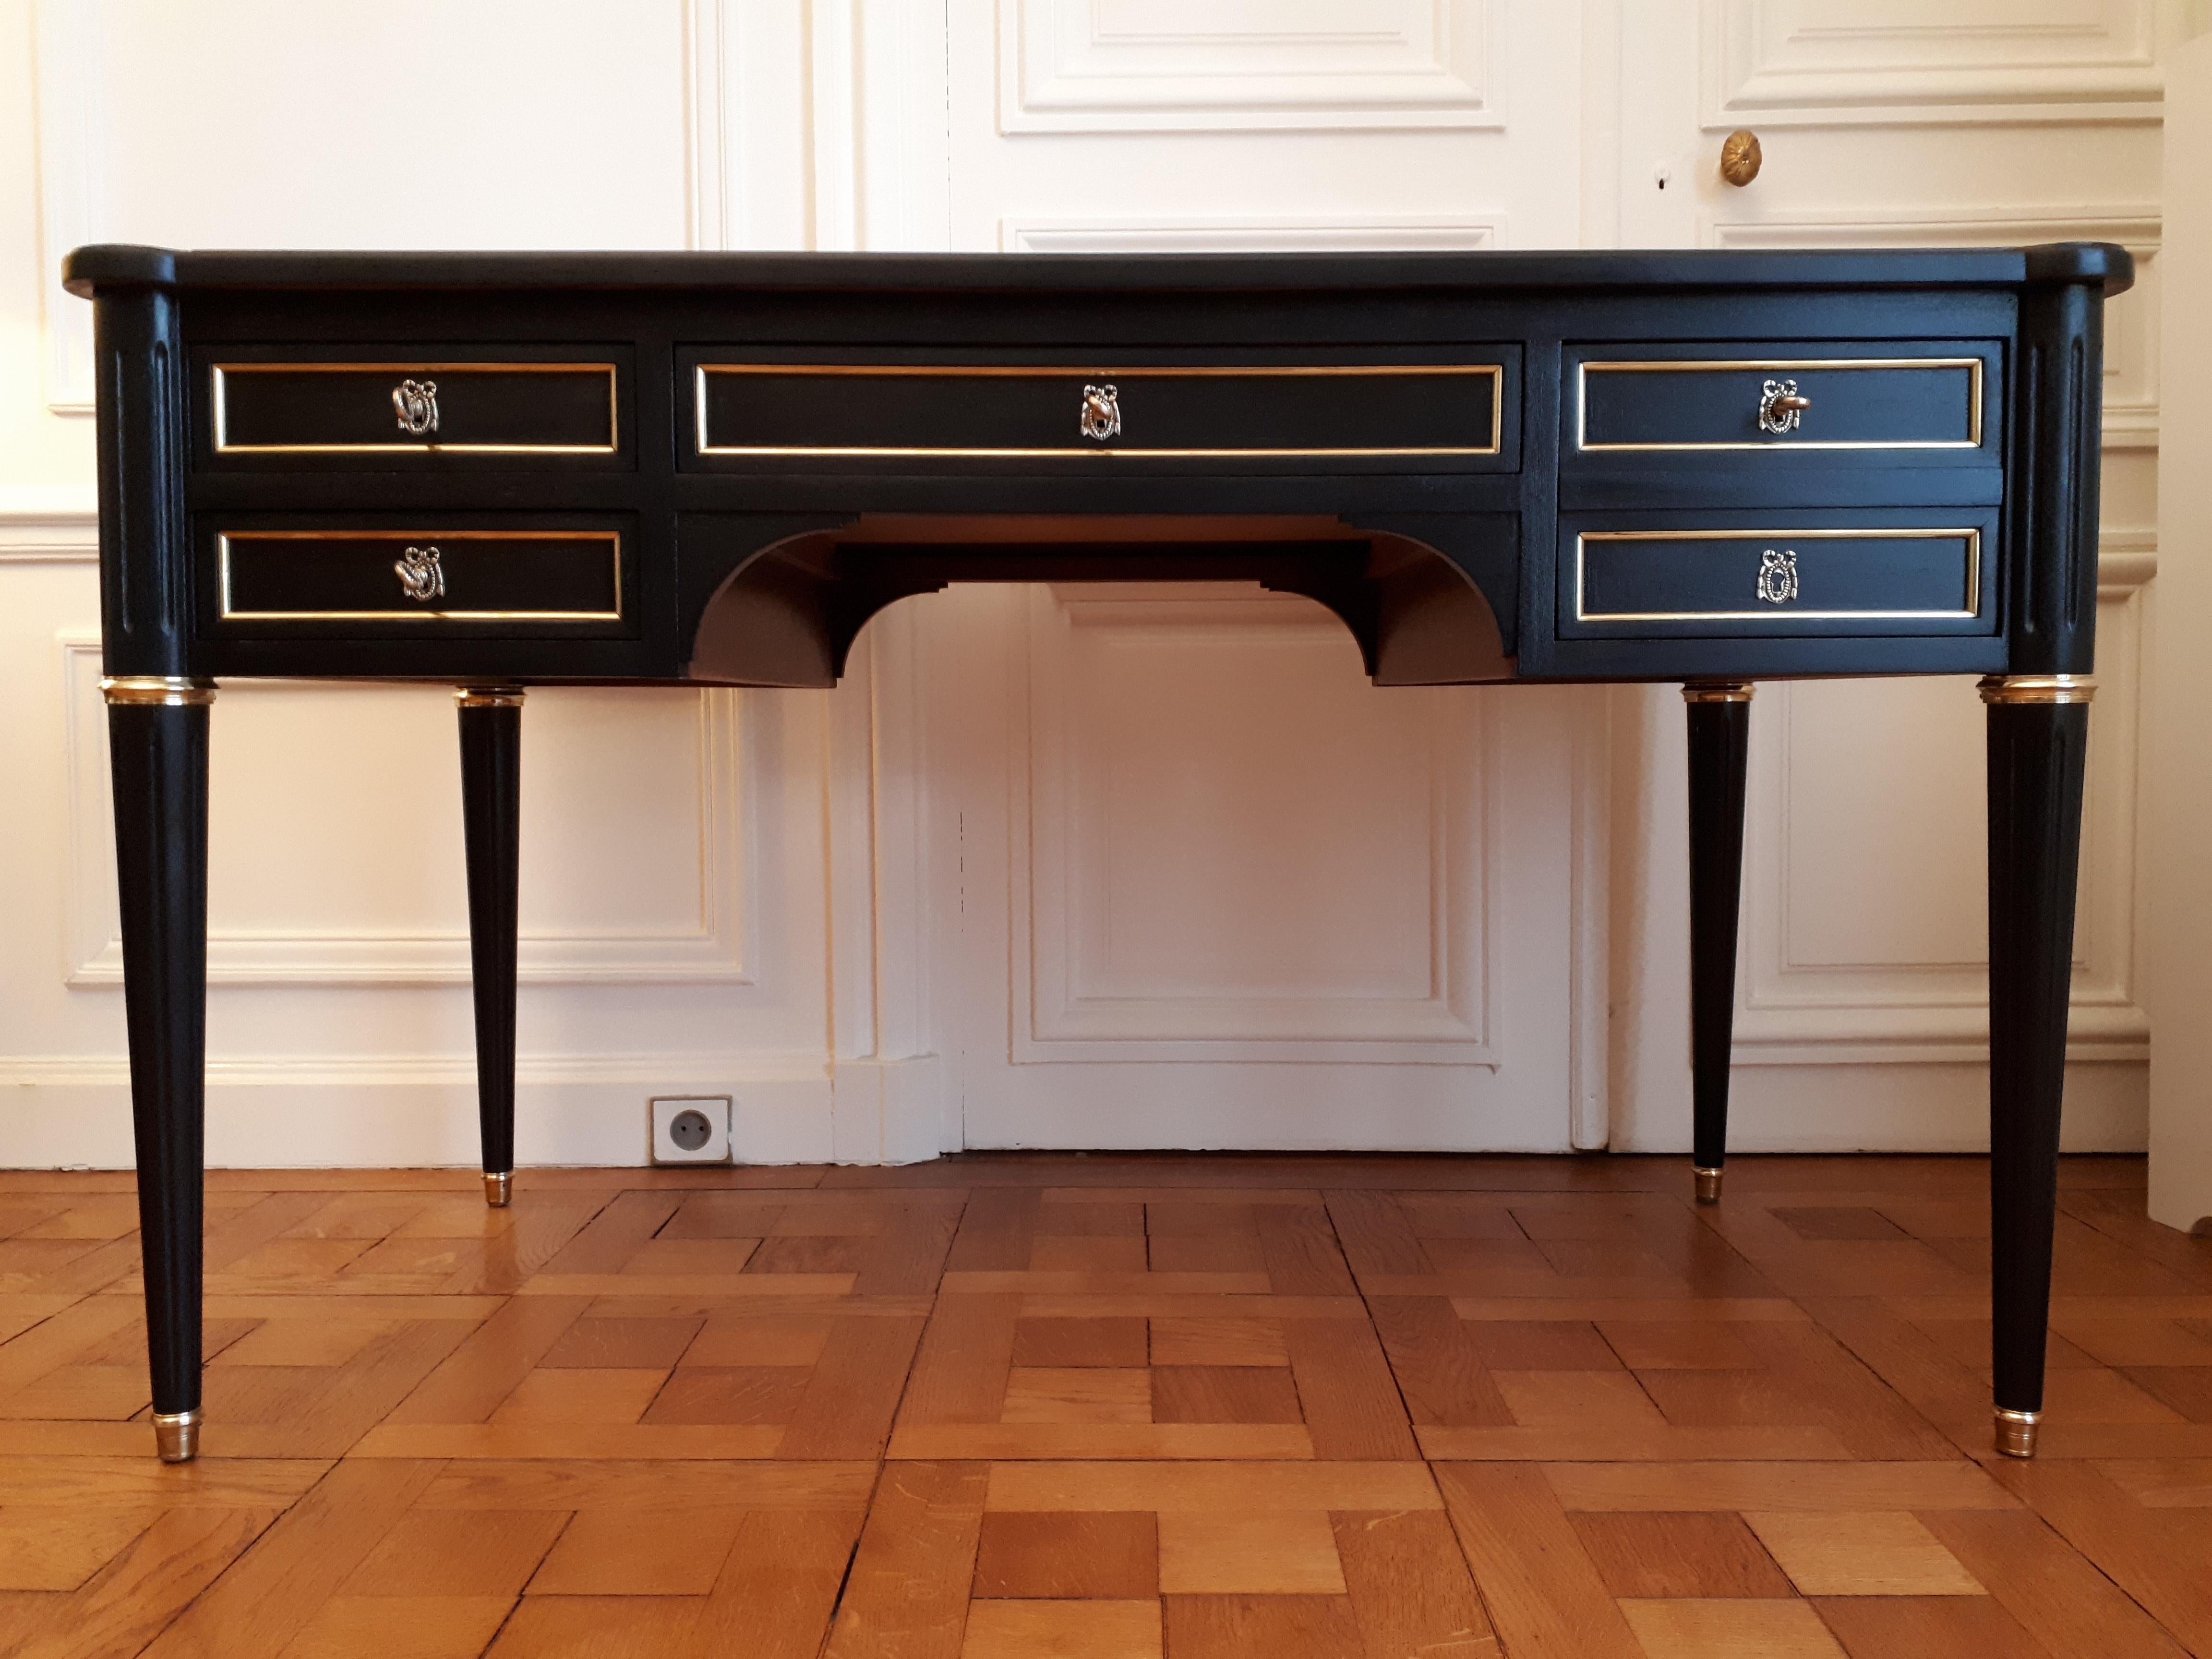 Antique Louis XVI style desk with cognac leather top and gold embossed frieze.
The front of the piece has four dovetail drawers with brass trim. The right double drawer is actually a single deep drawer with a secret hiding place in the double